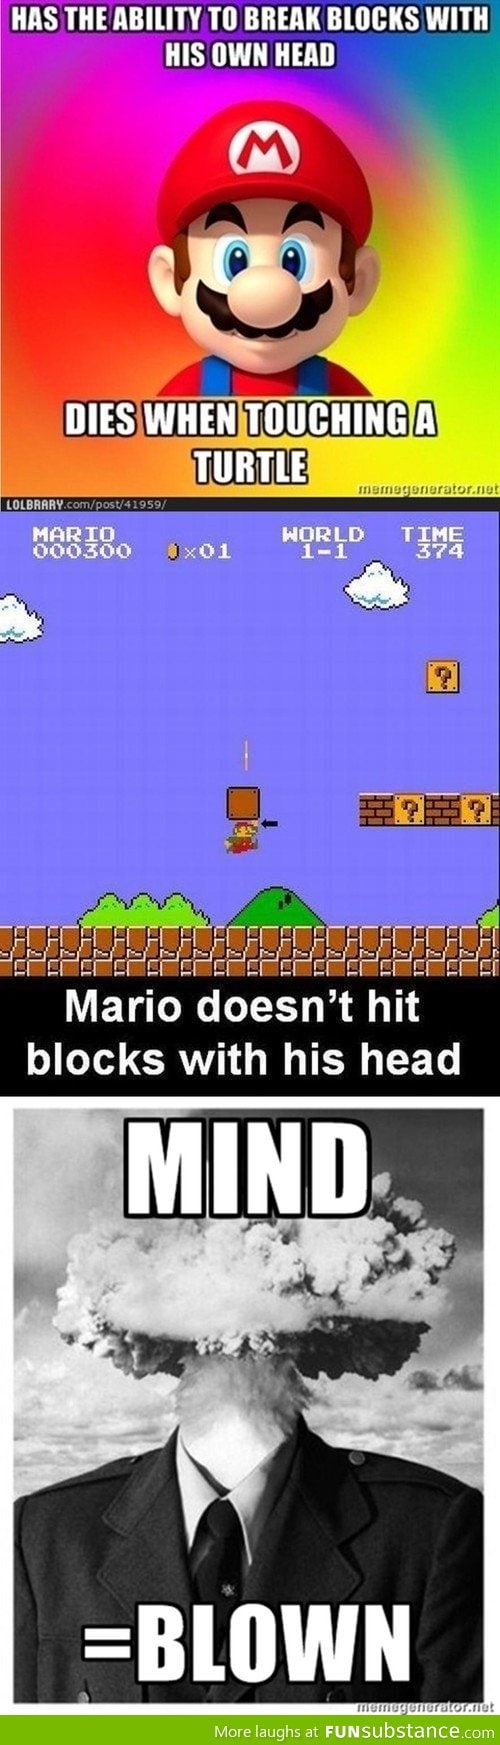 Mario uses his fists actually